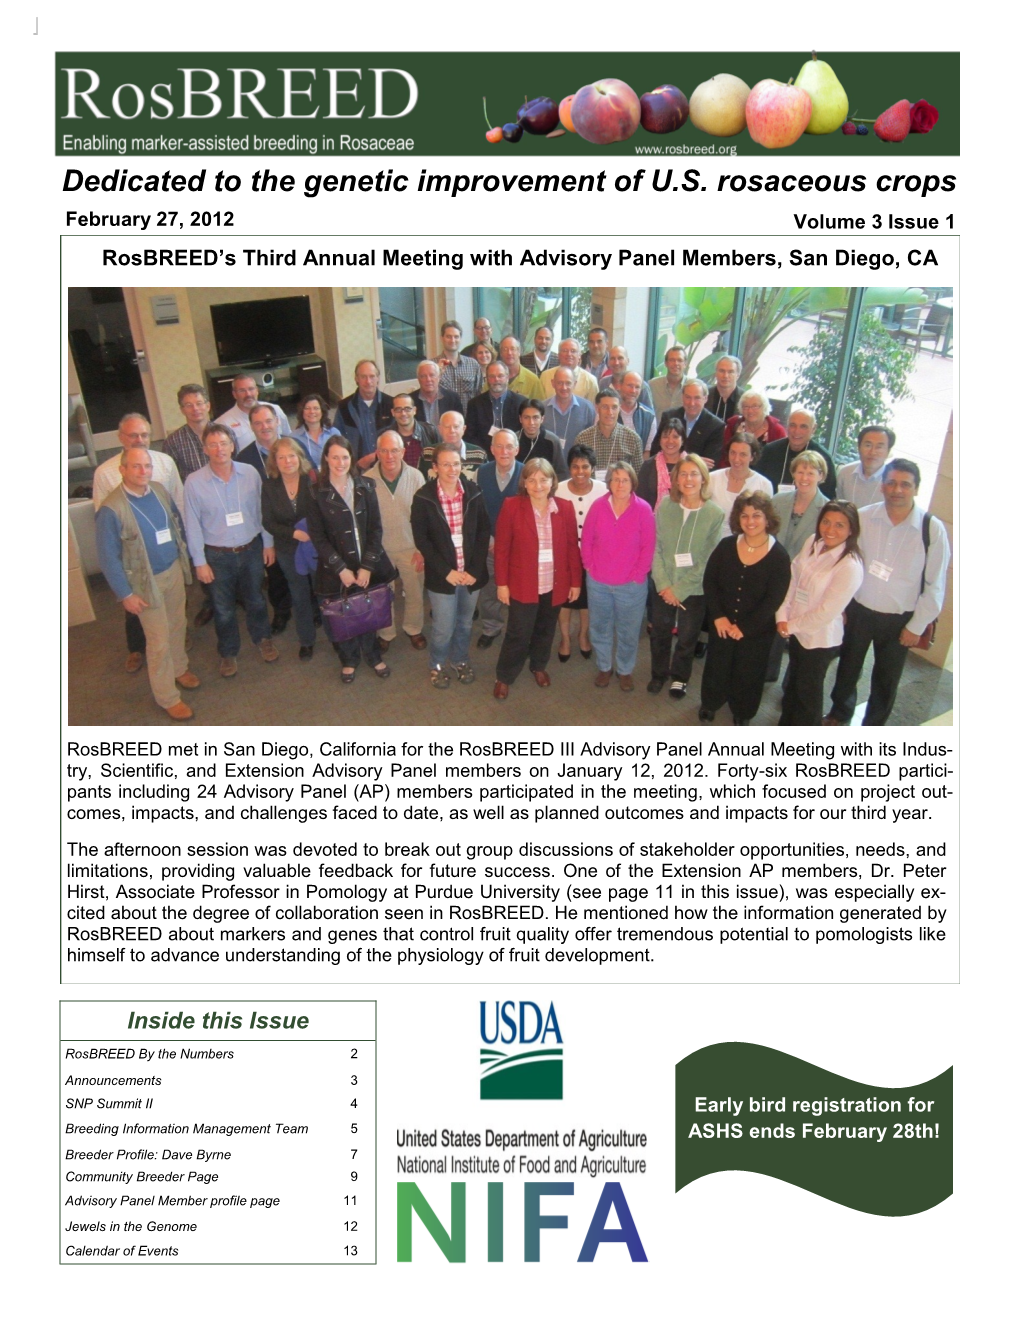 Dedicated to the Genetic Improvement of U.S. Rosaceous Crops February 27, 2012 Volume 3 Issue 1